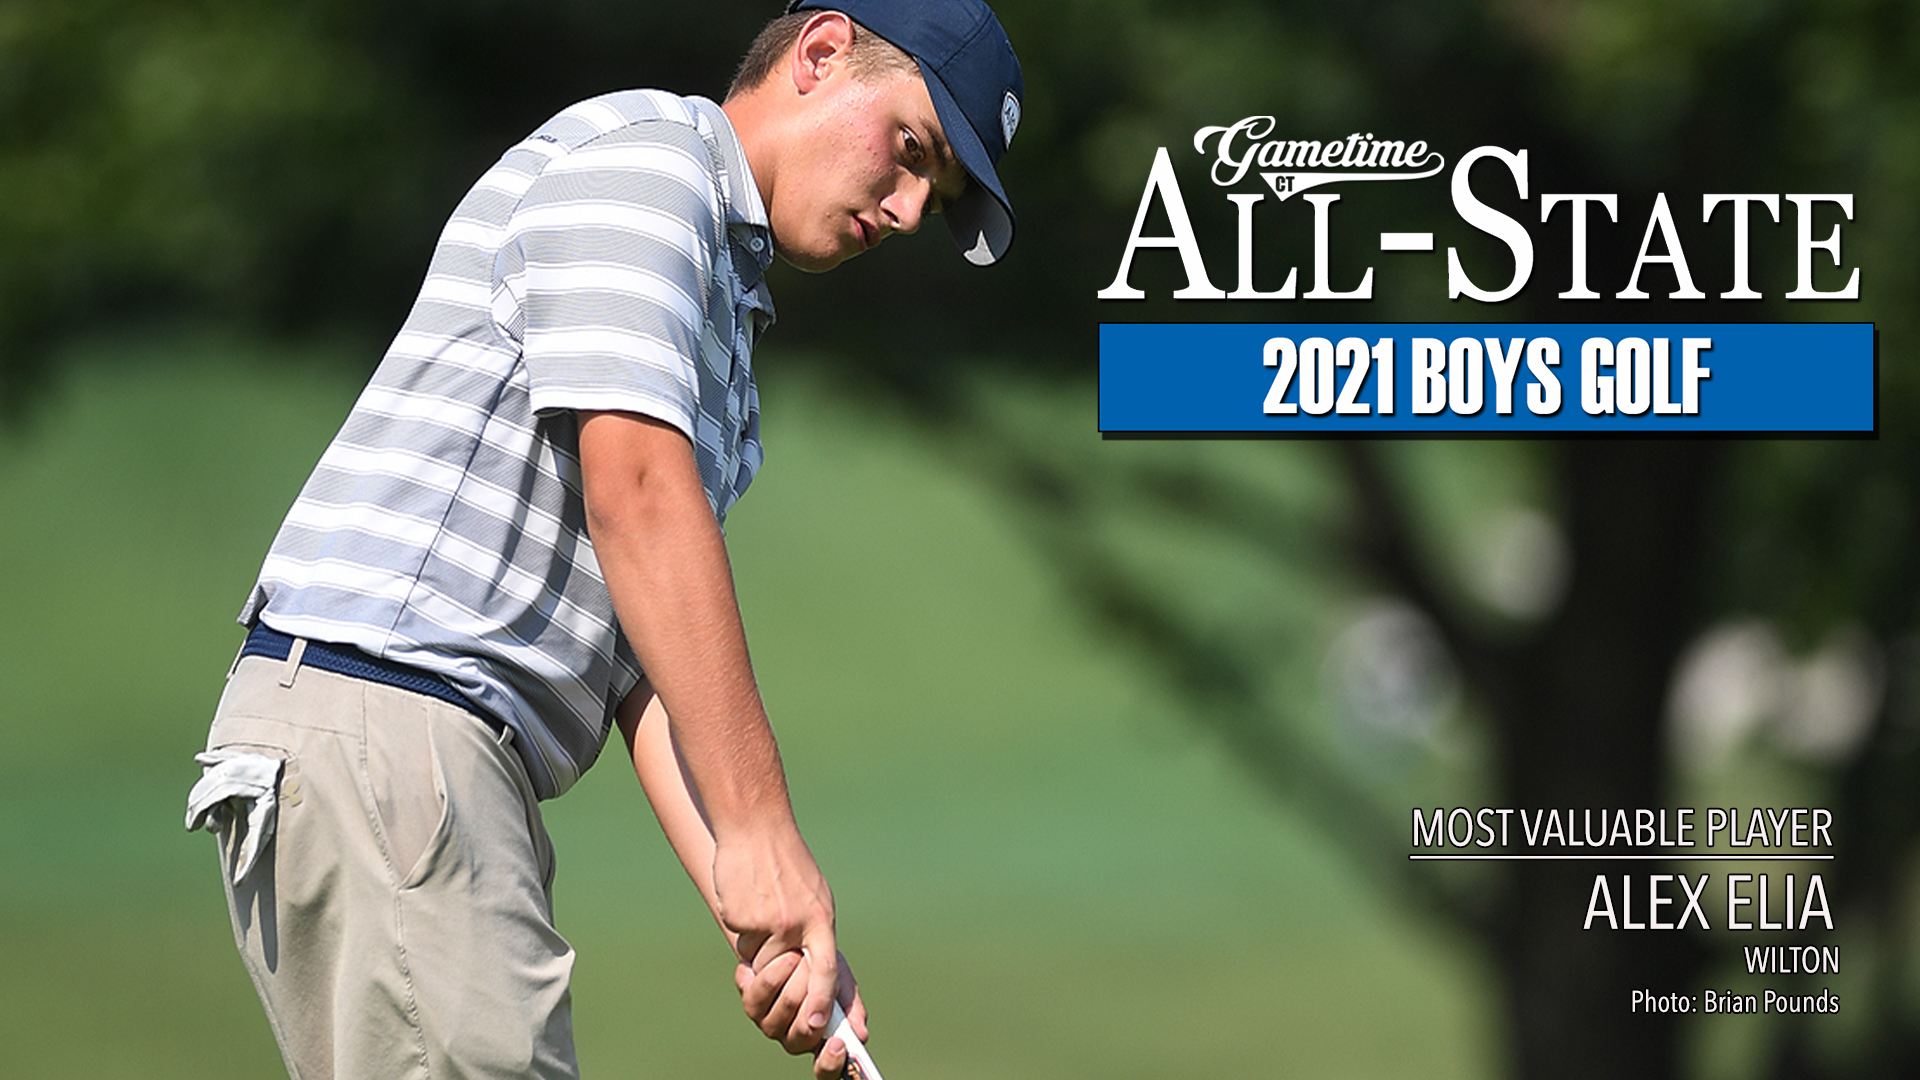 The 2021 GameTimeCT All-State Boys Golf Team